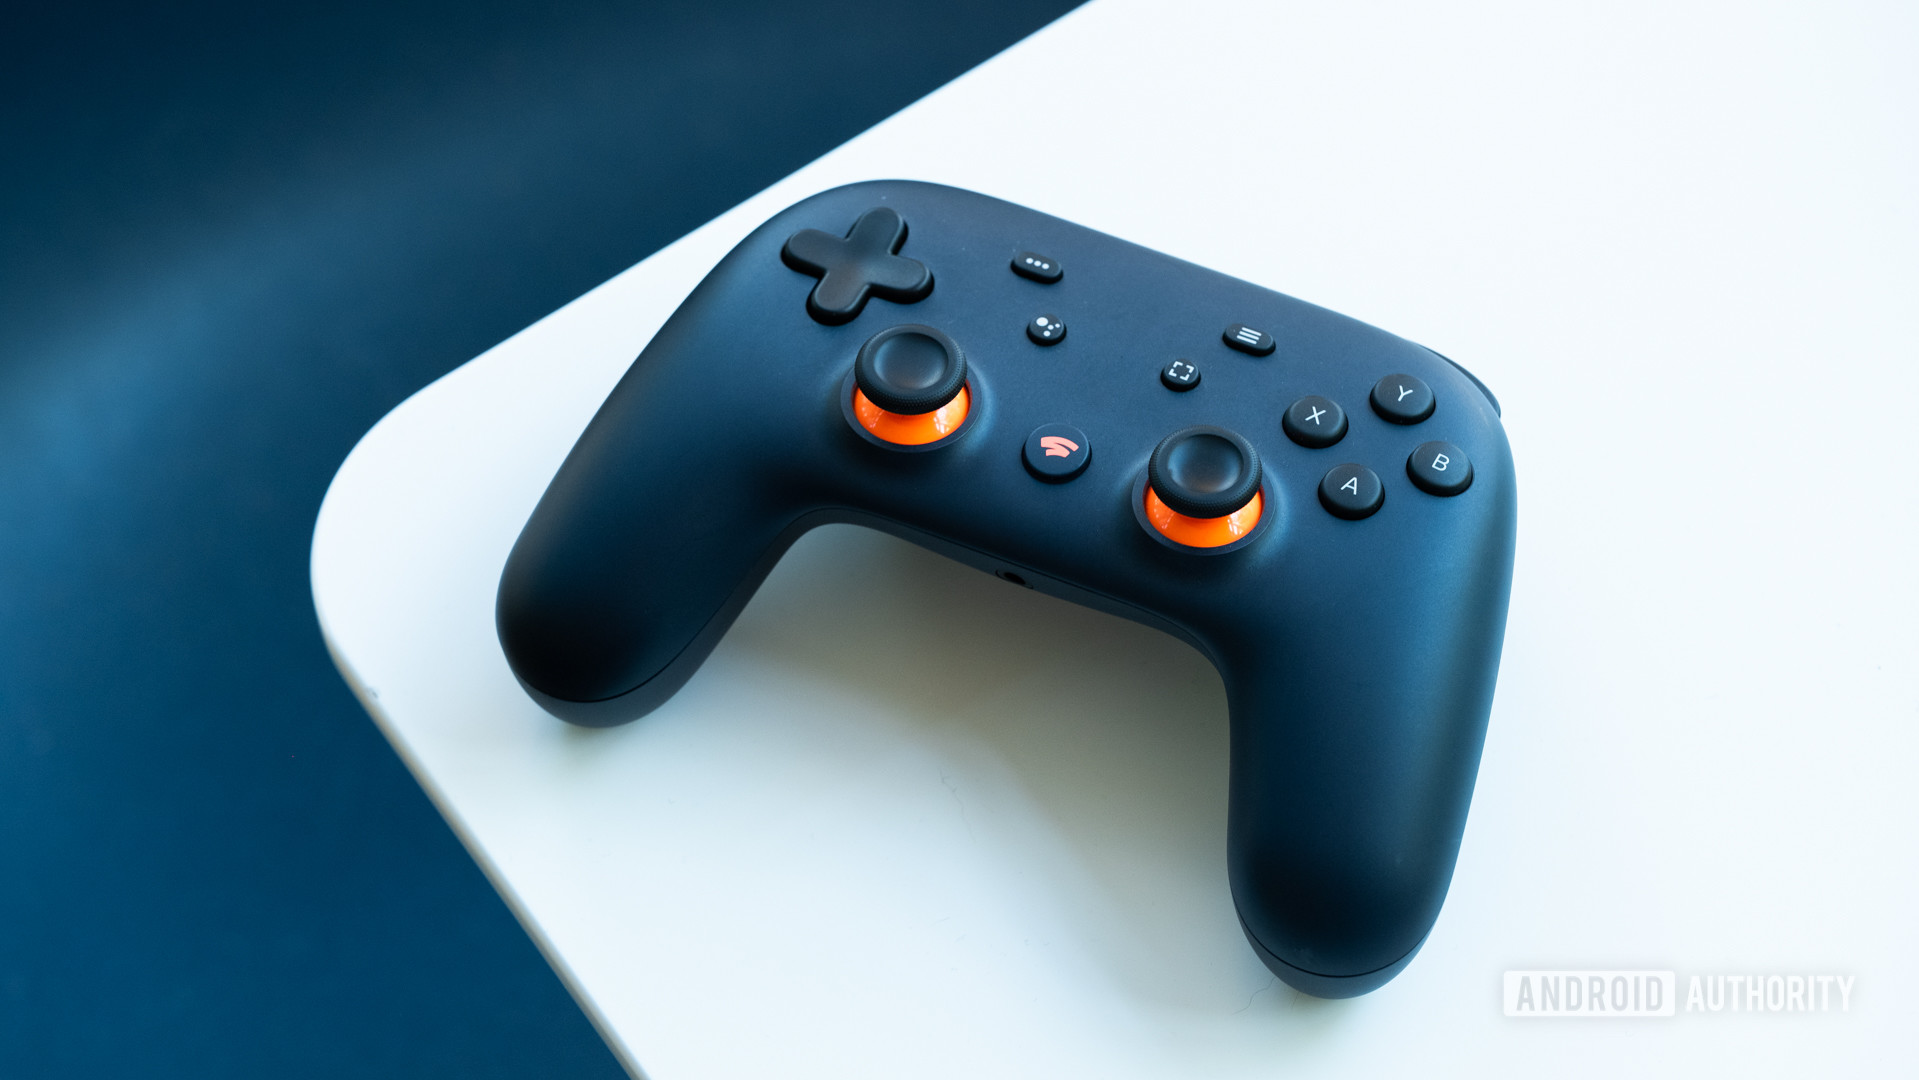 Google Stadia controller on table